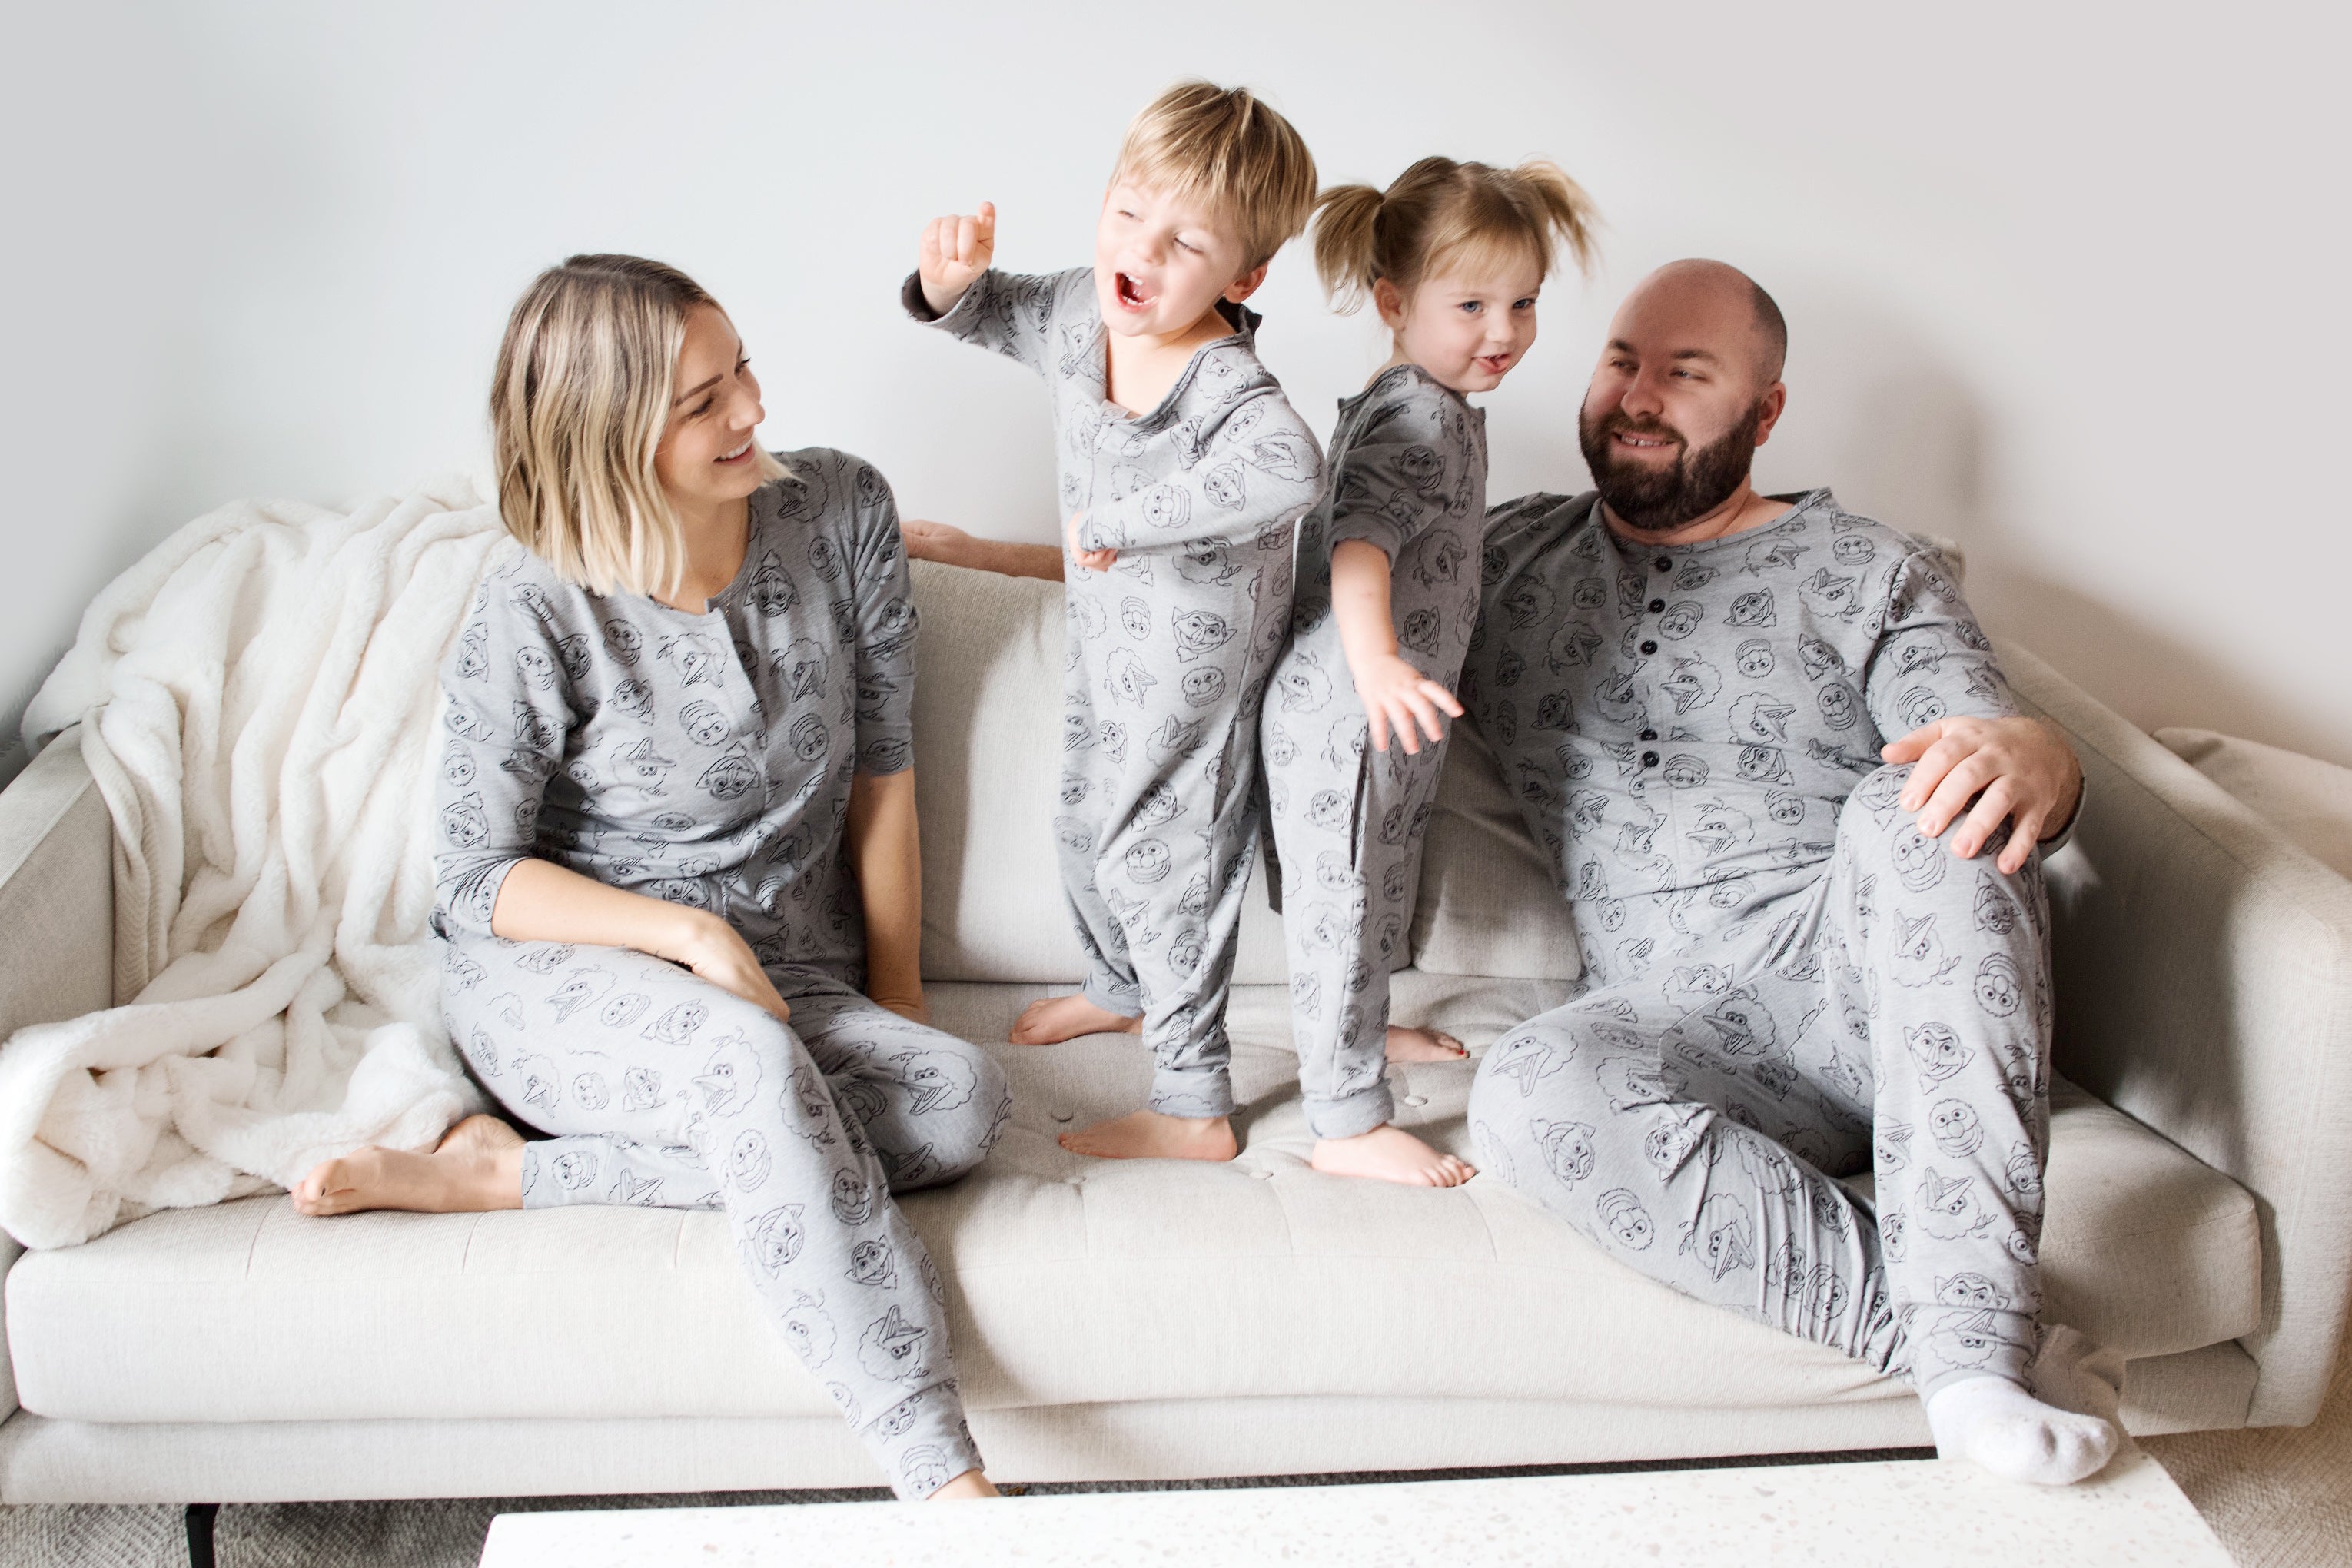 adrienne neufeld and family in smash + tess sesame street rompers